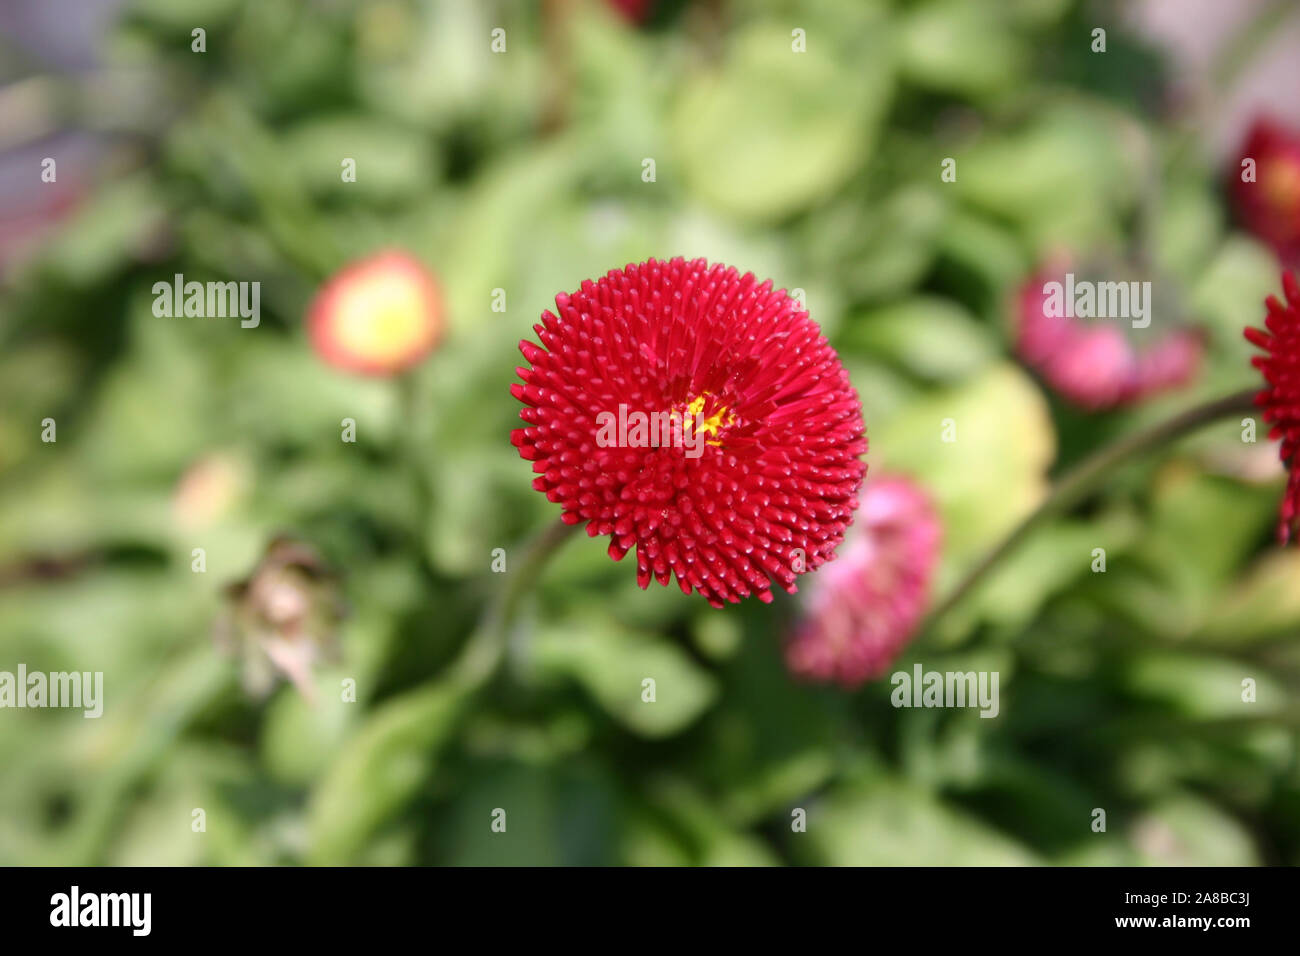 CLOSE-UP OF A COMMON OR ENGLISH DAISY (BELLIS PERENNIS) Stock Photo